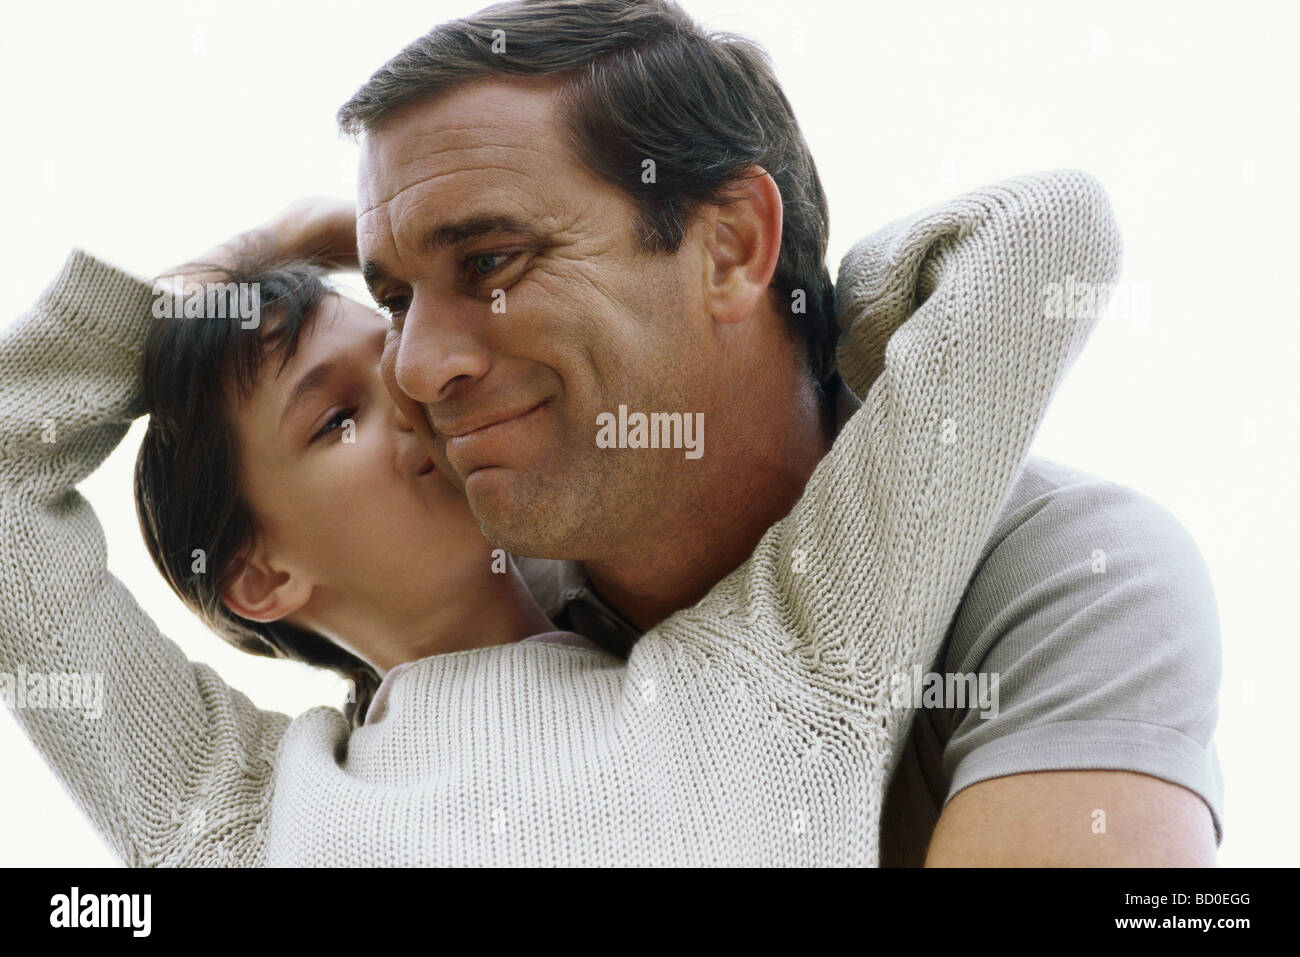 Girl kissing her father on cheek Stock Photo